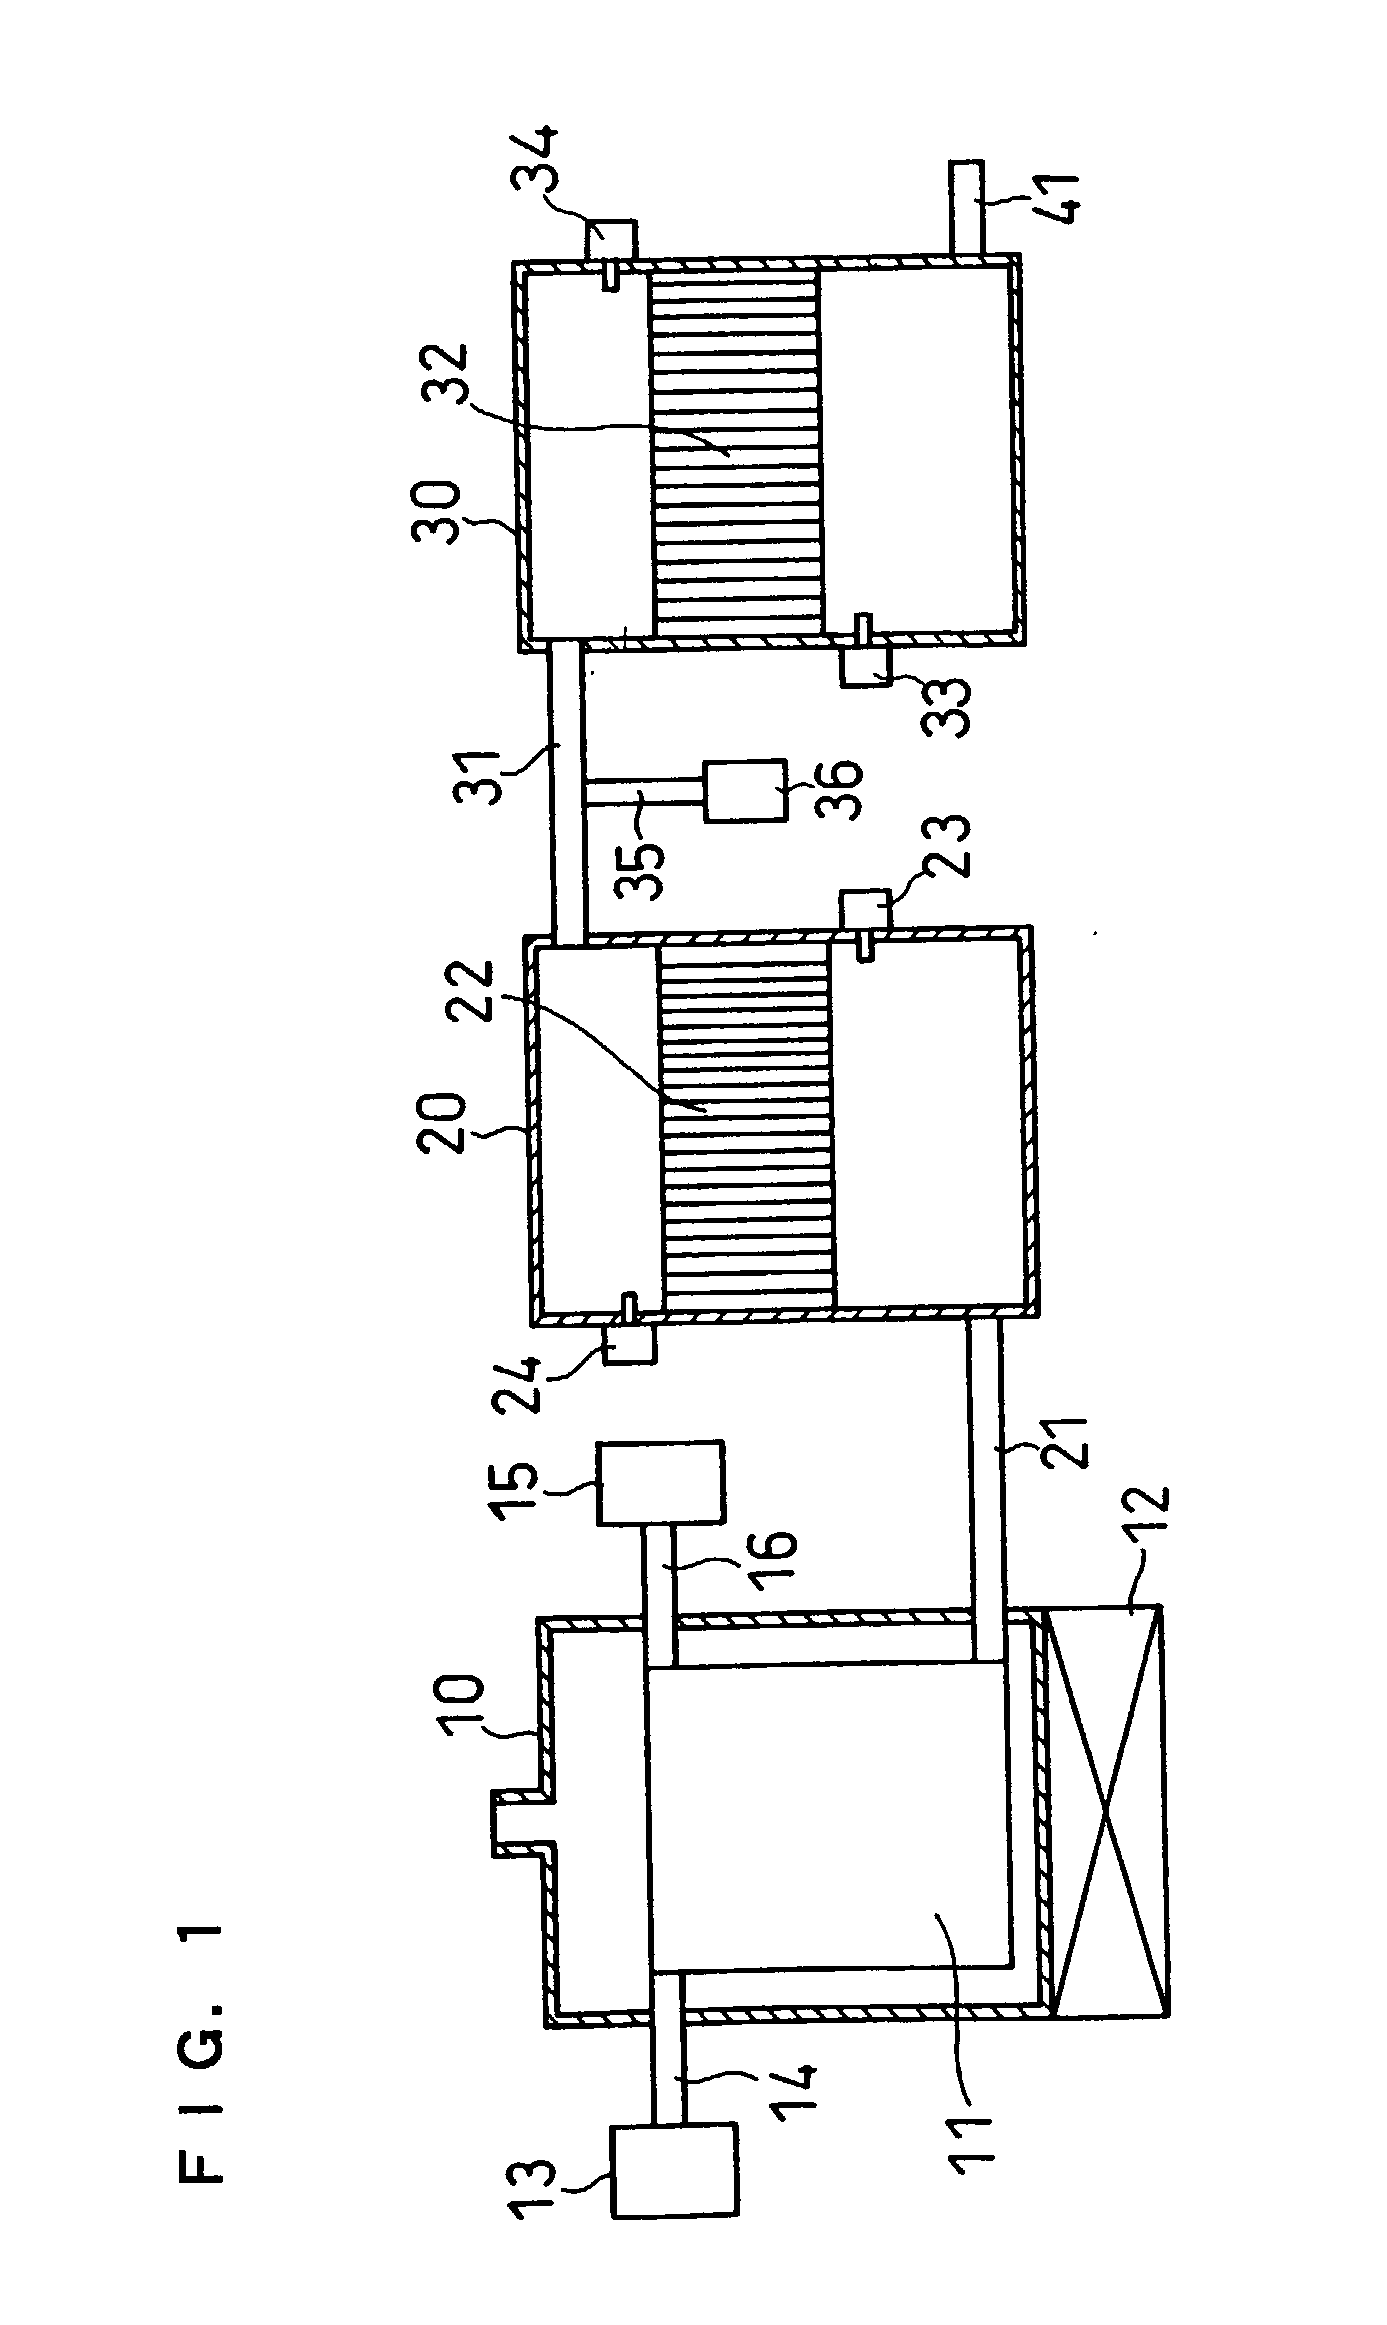 Apparatus for forming hydrogen